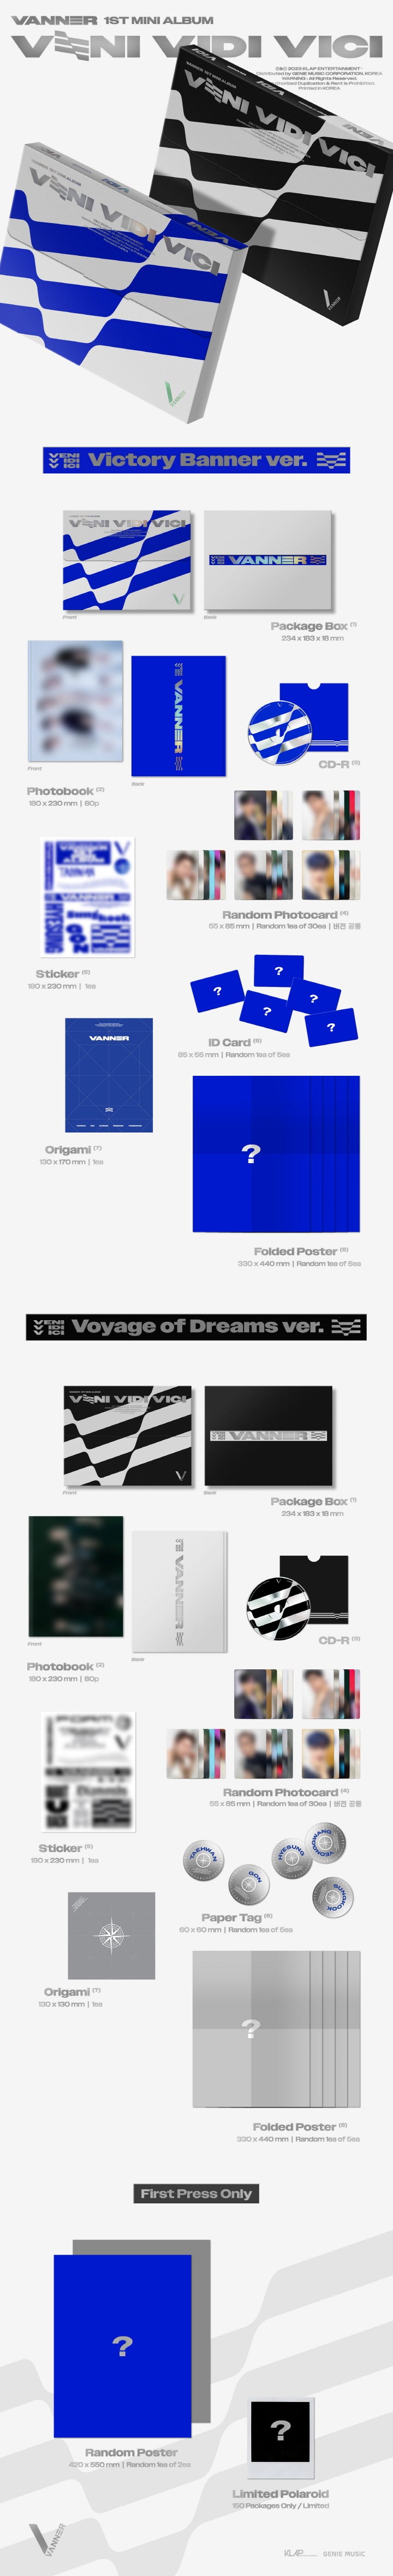 1 CD
1 Photo Book (80 pages)
1 Random Photo Card (random out of 30 types)
1 Sticker
1 ID Card / 1 Paper Tag (random out of...